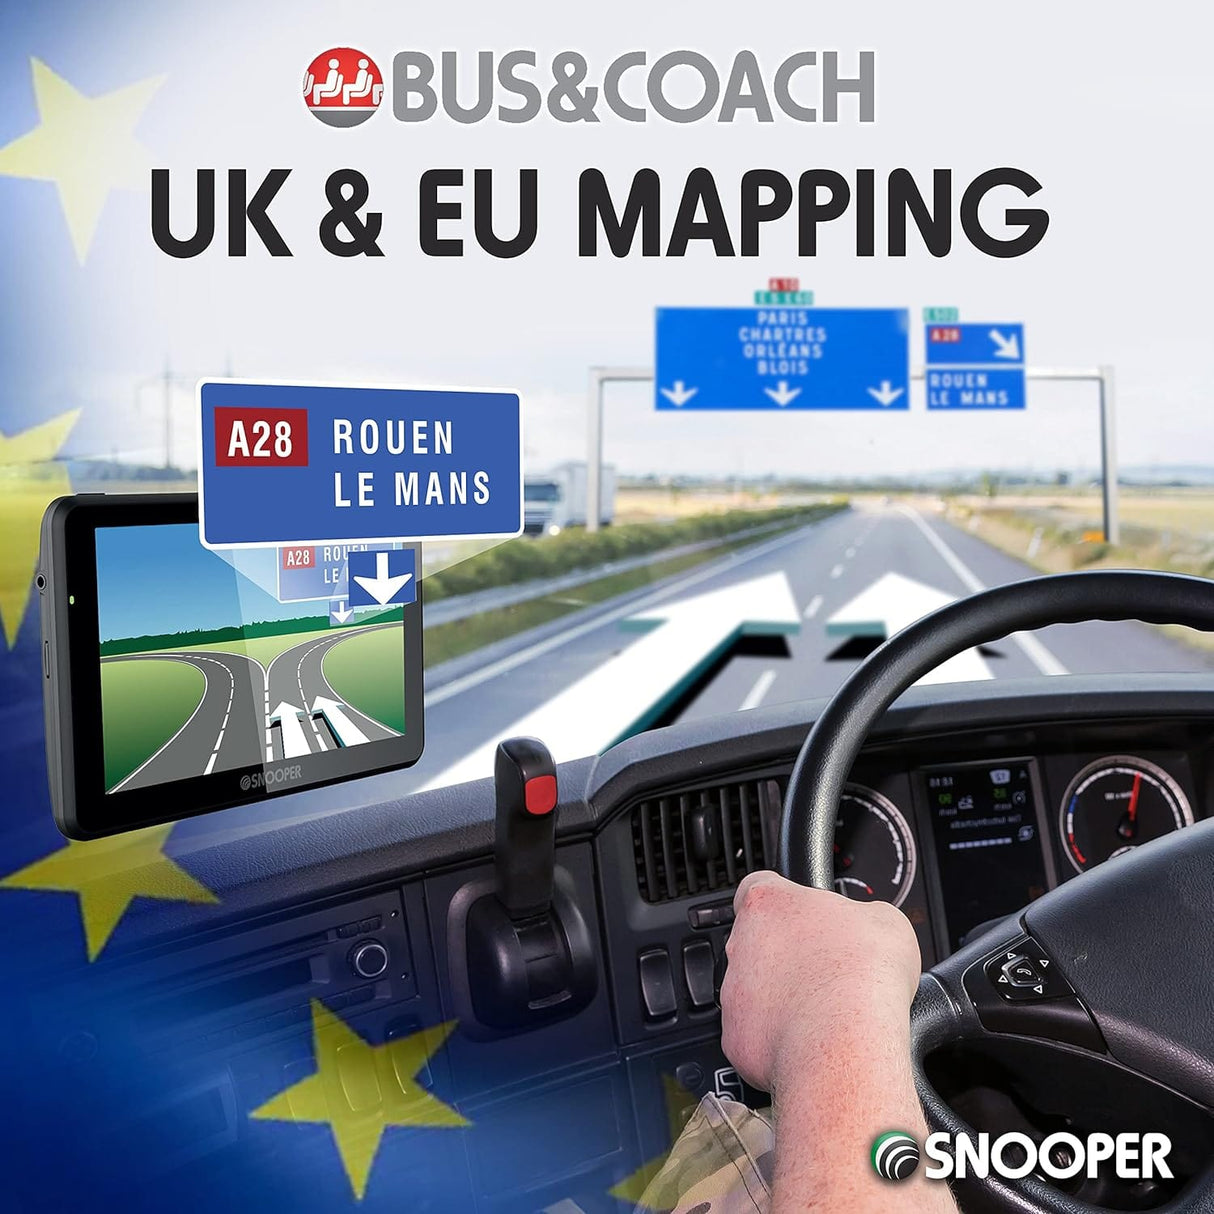 Snooper Sat Navs Snooper S6900 Bus & Coach-Pro Navigation System with 7" Widescreen LCD